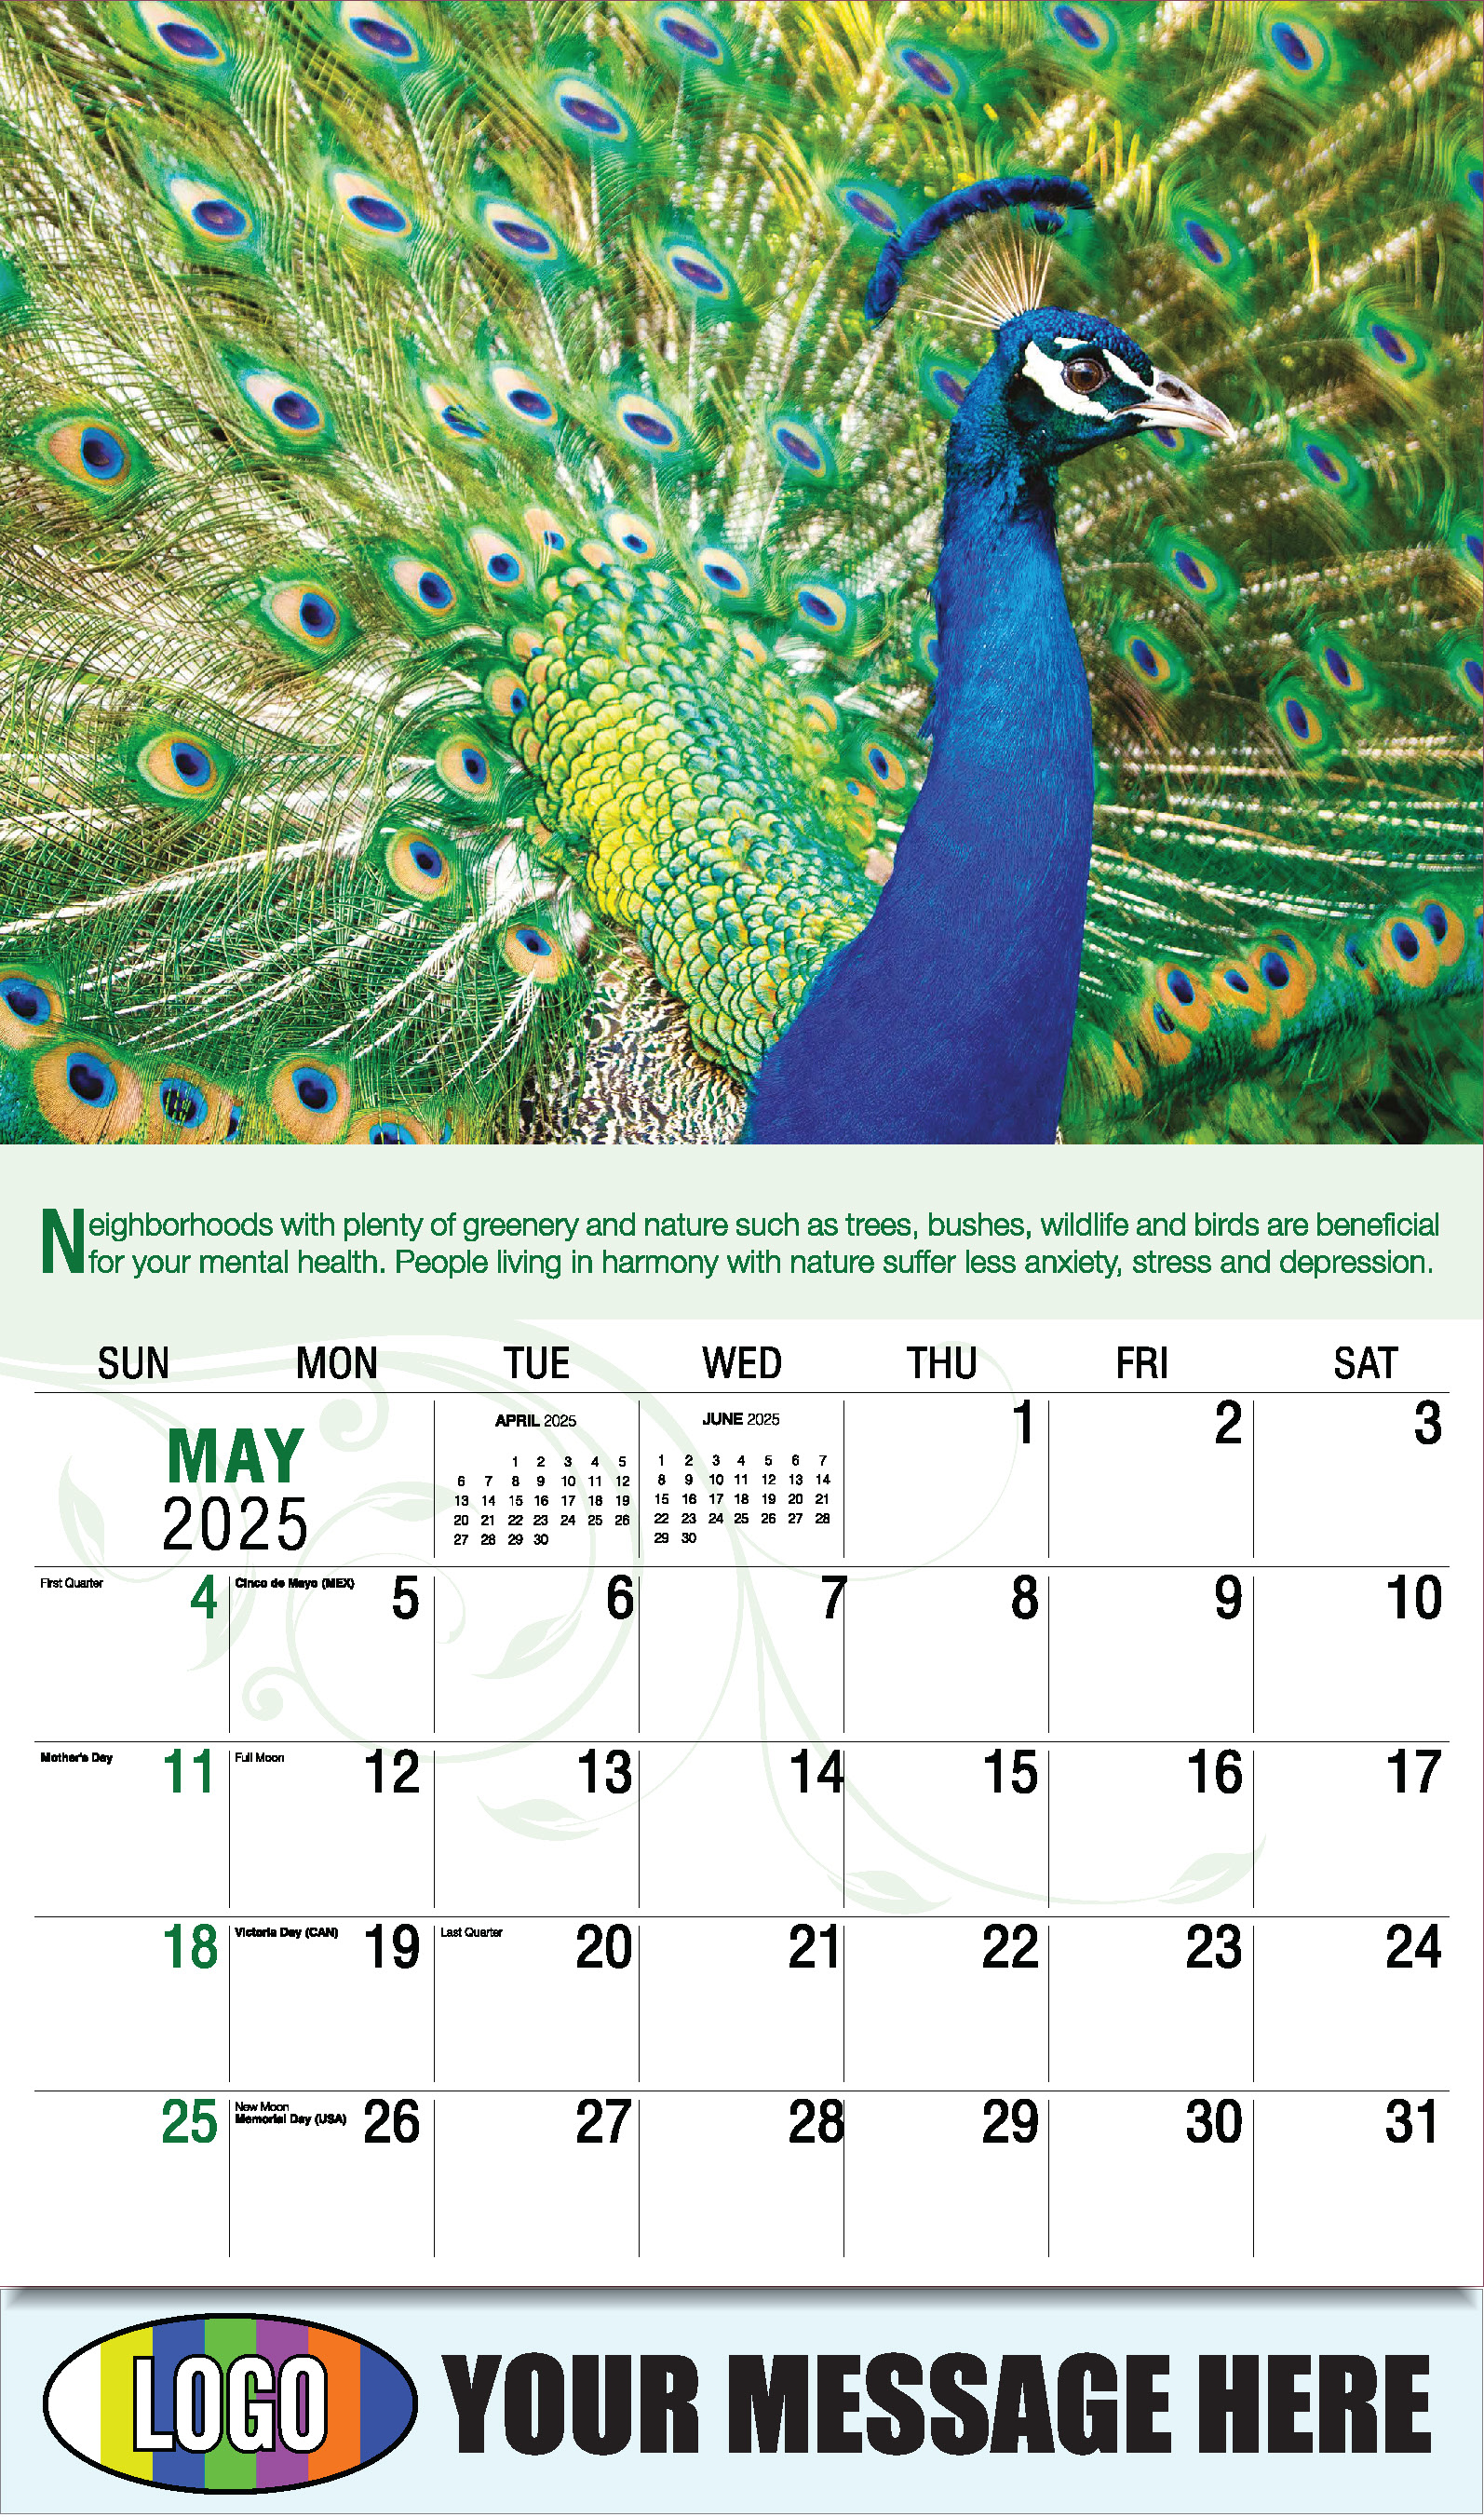 Go Green 2025 Business Promotion Calendar - May